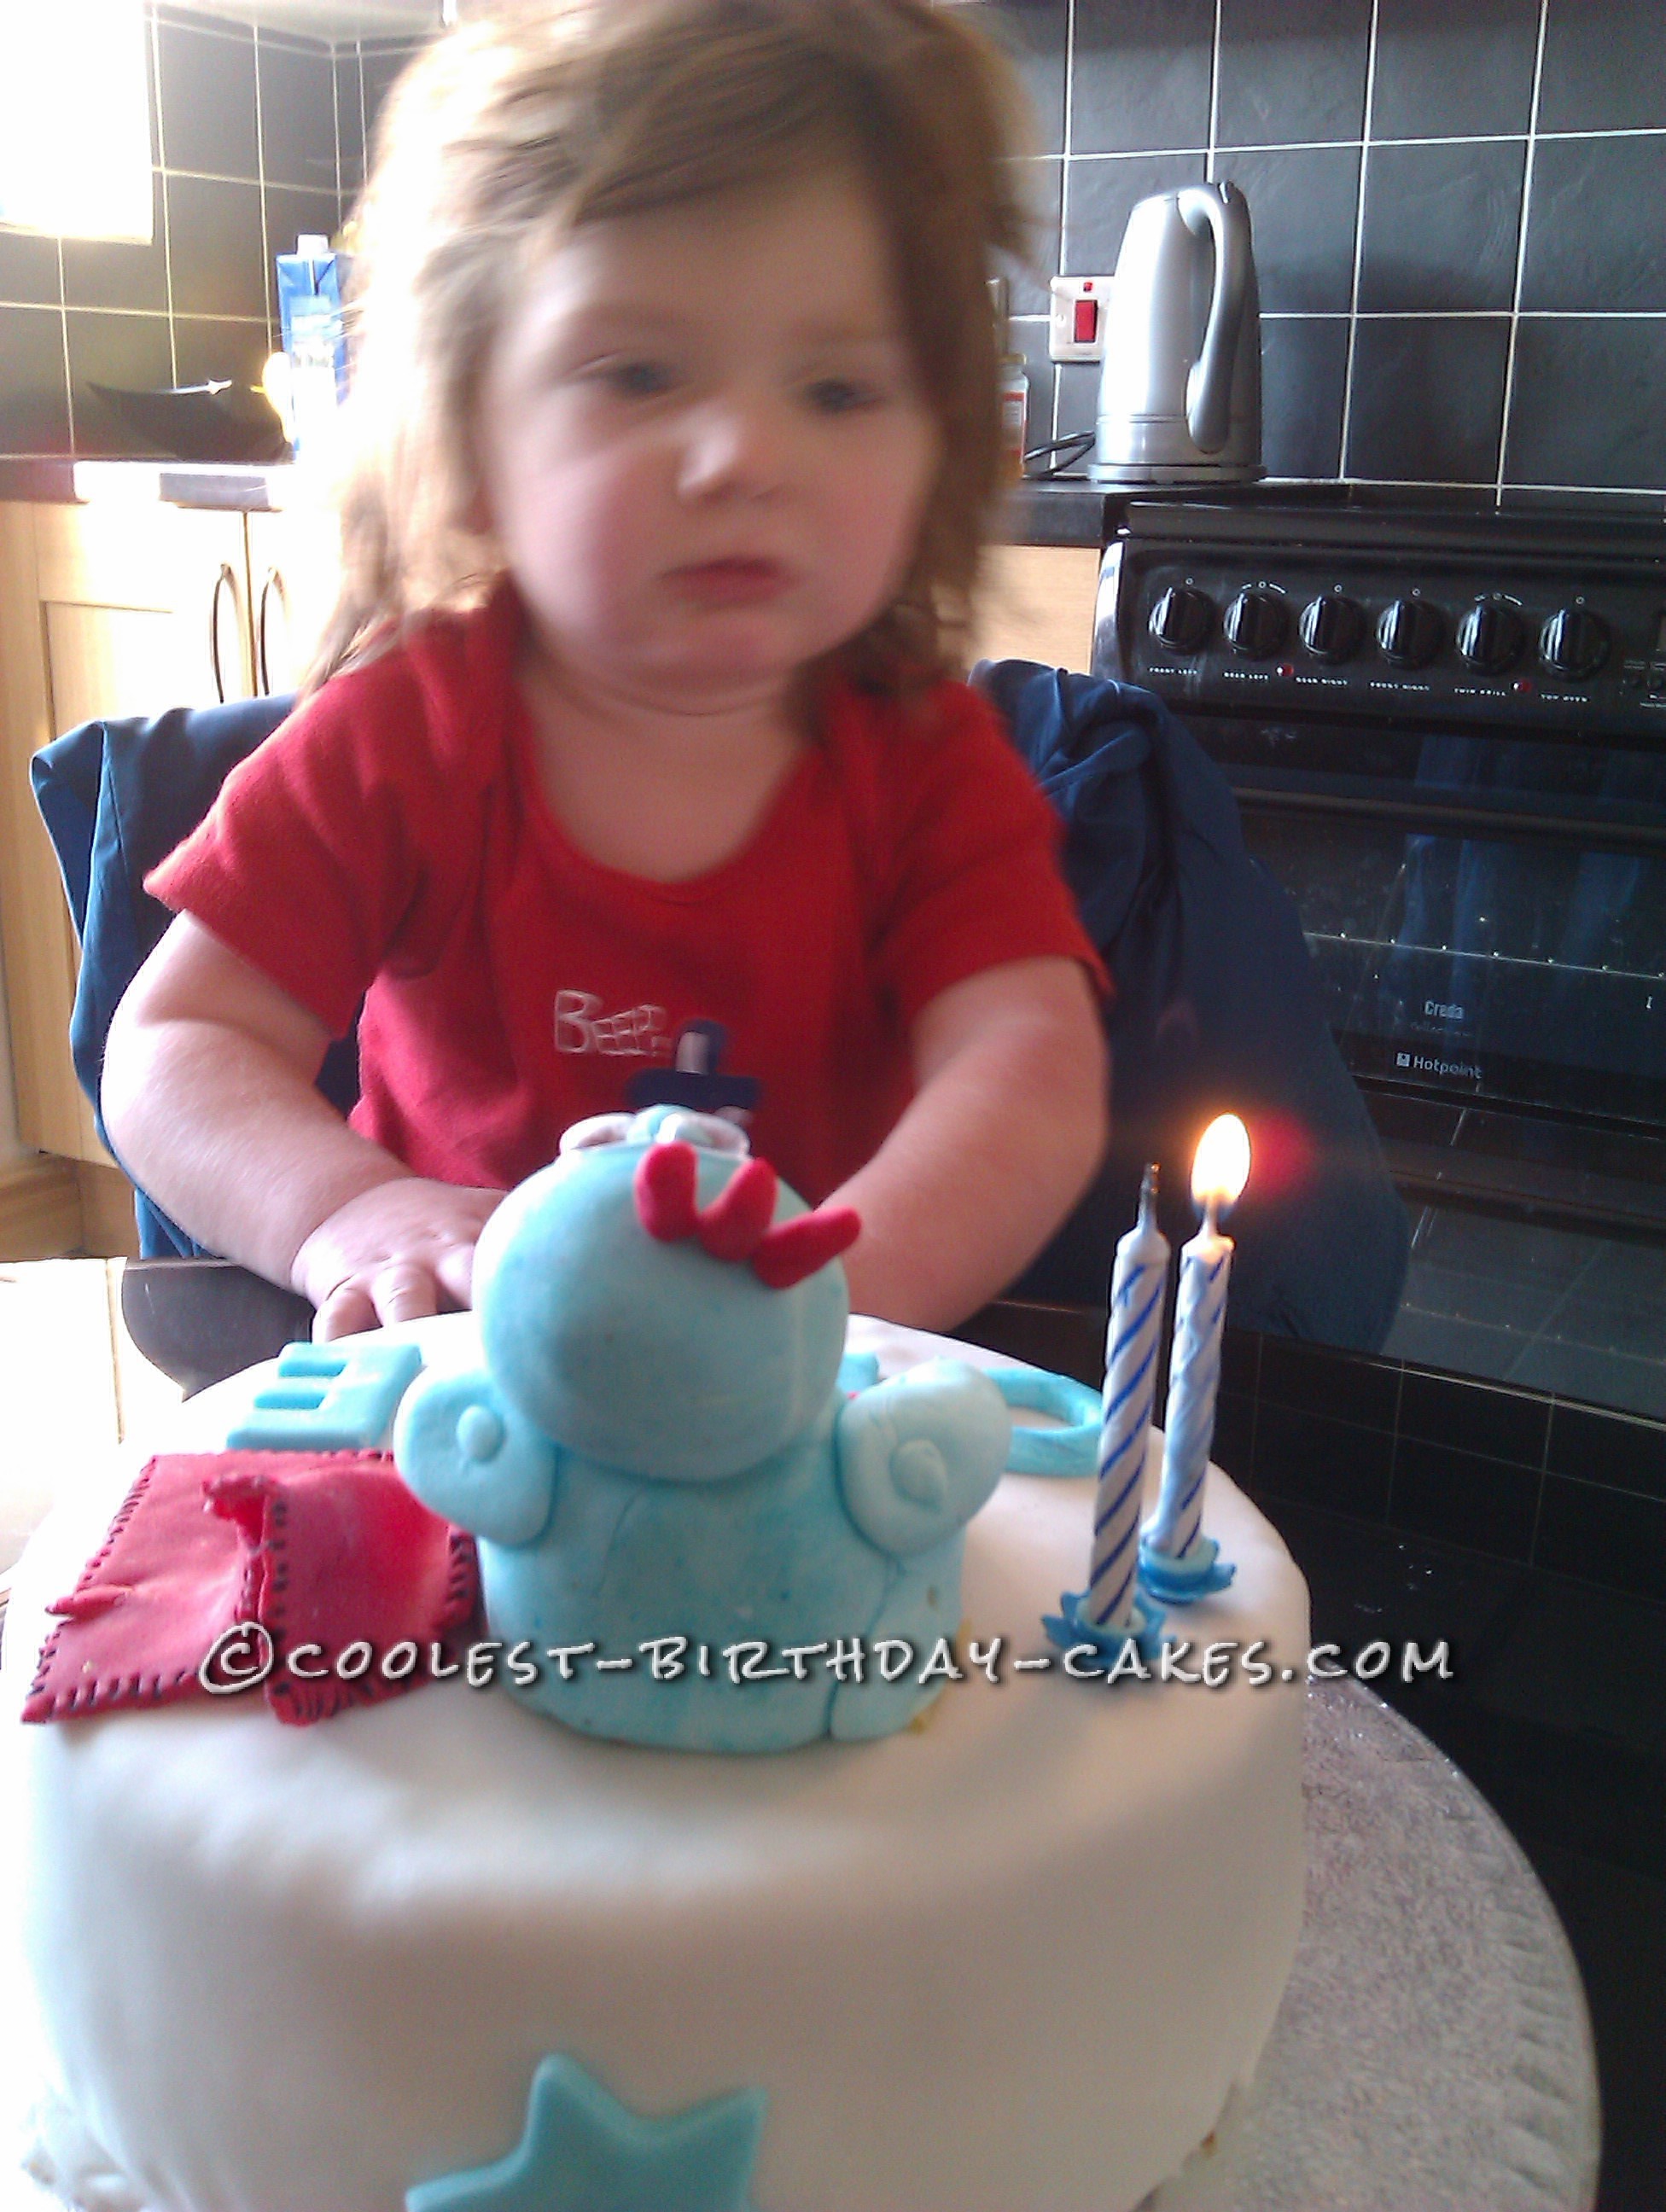 Cool Iggle Piggle Cake for a 2 Year Old